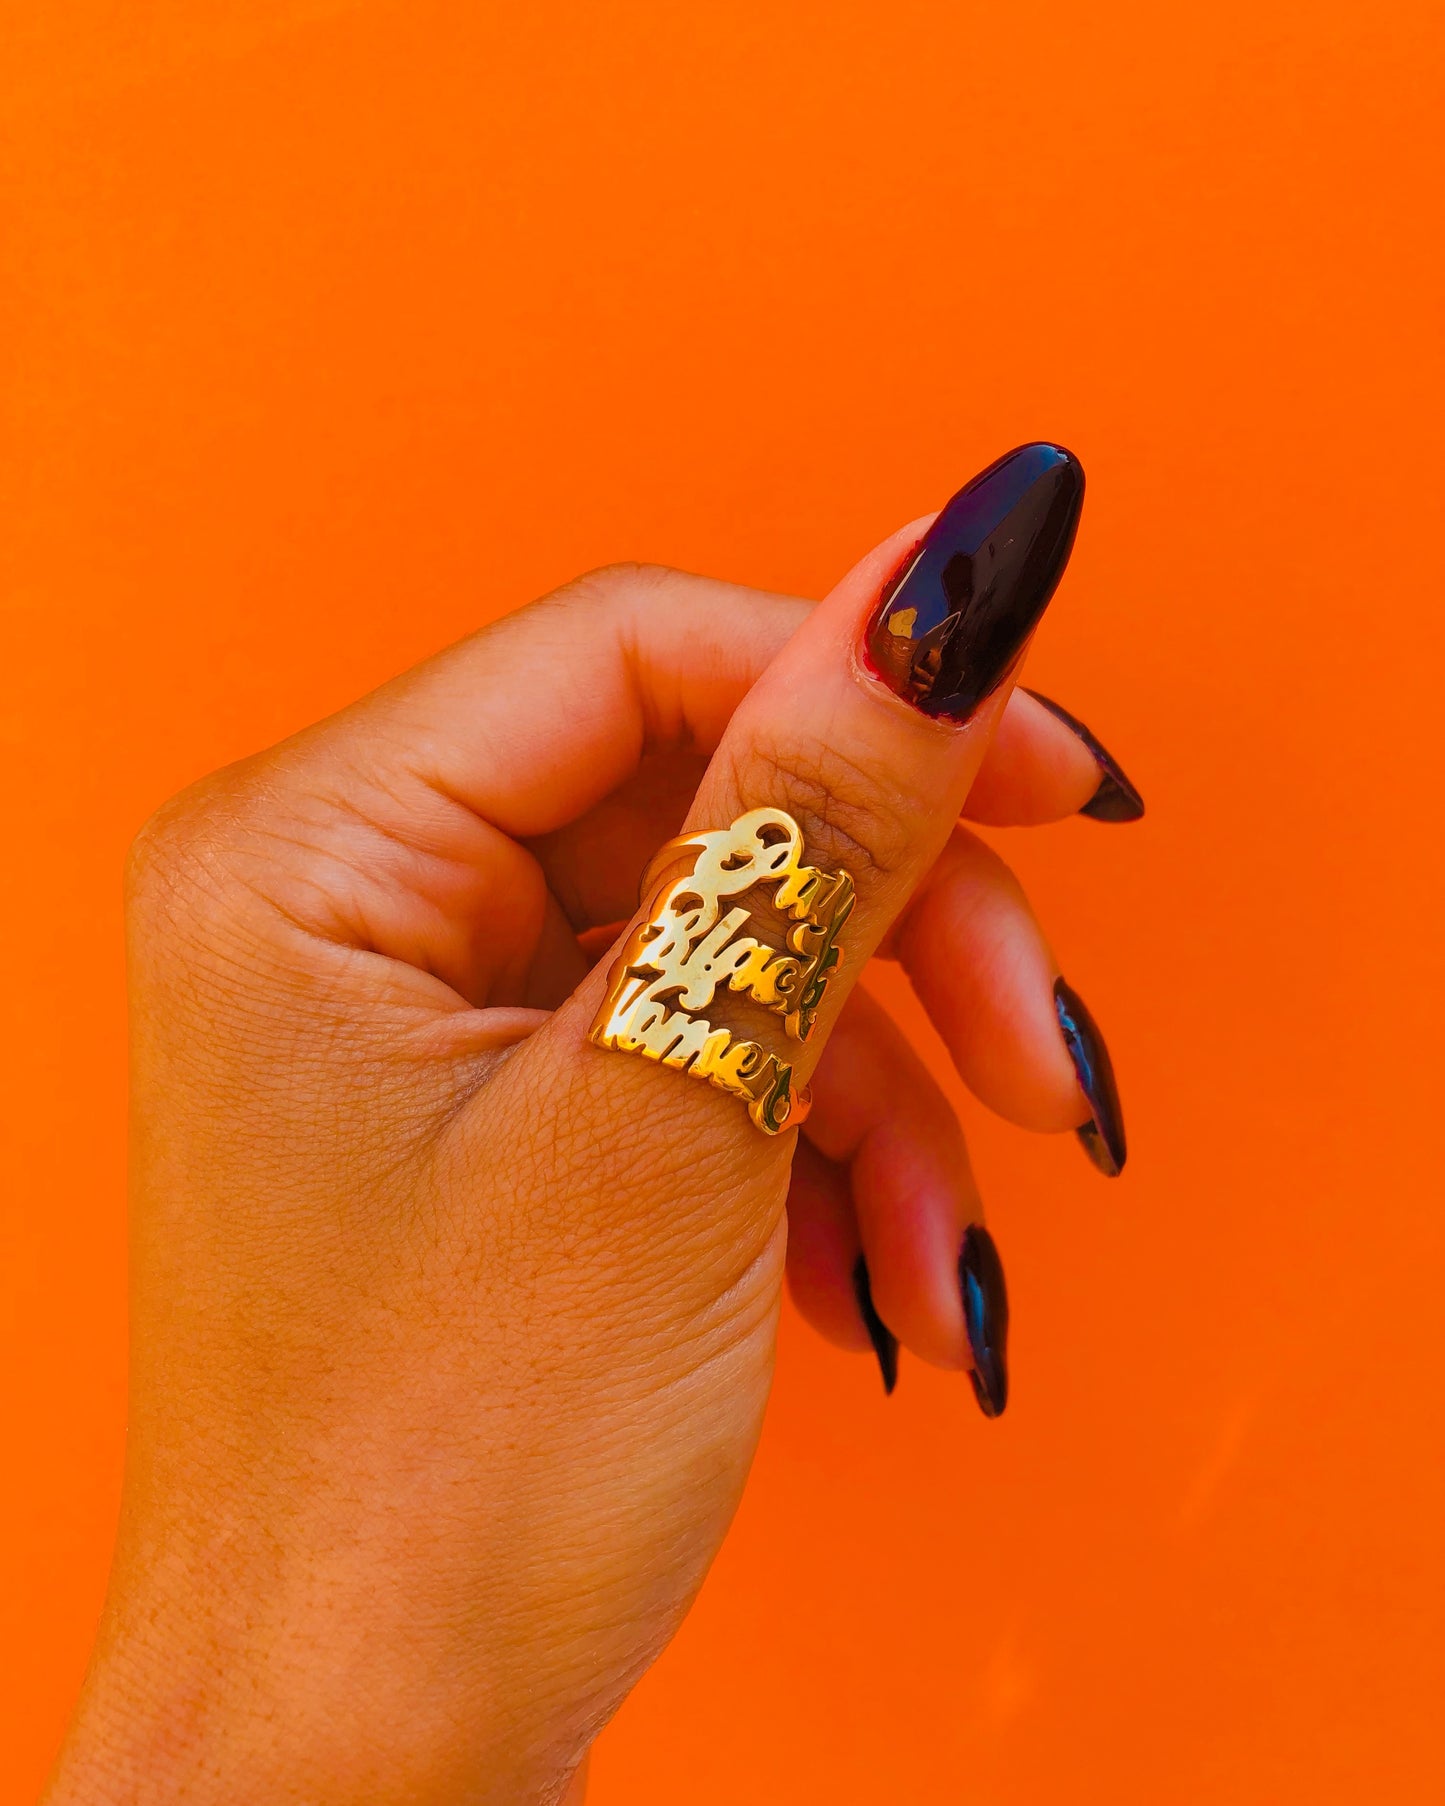 Pay Black Women 18k Gold Plated Ring - Brownie Points for You